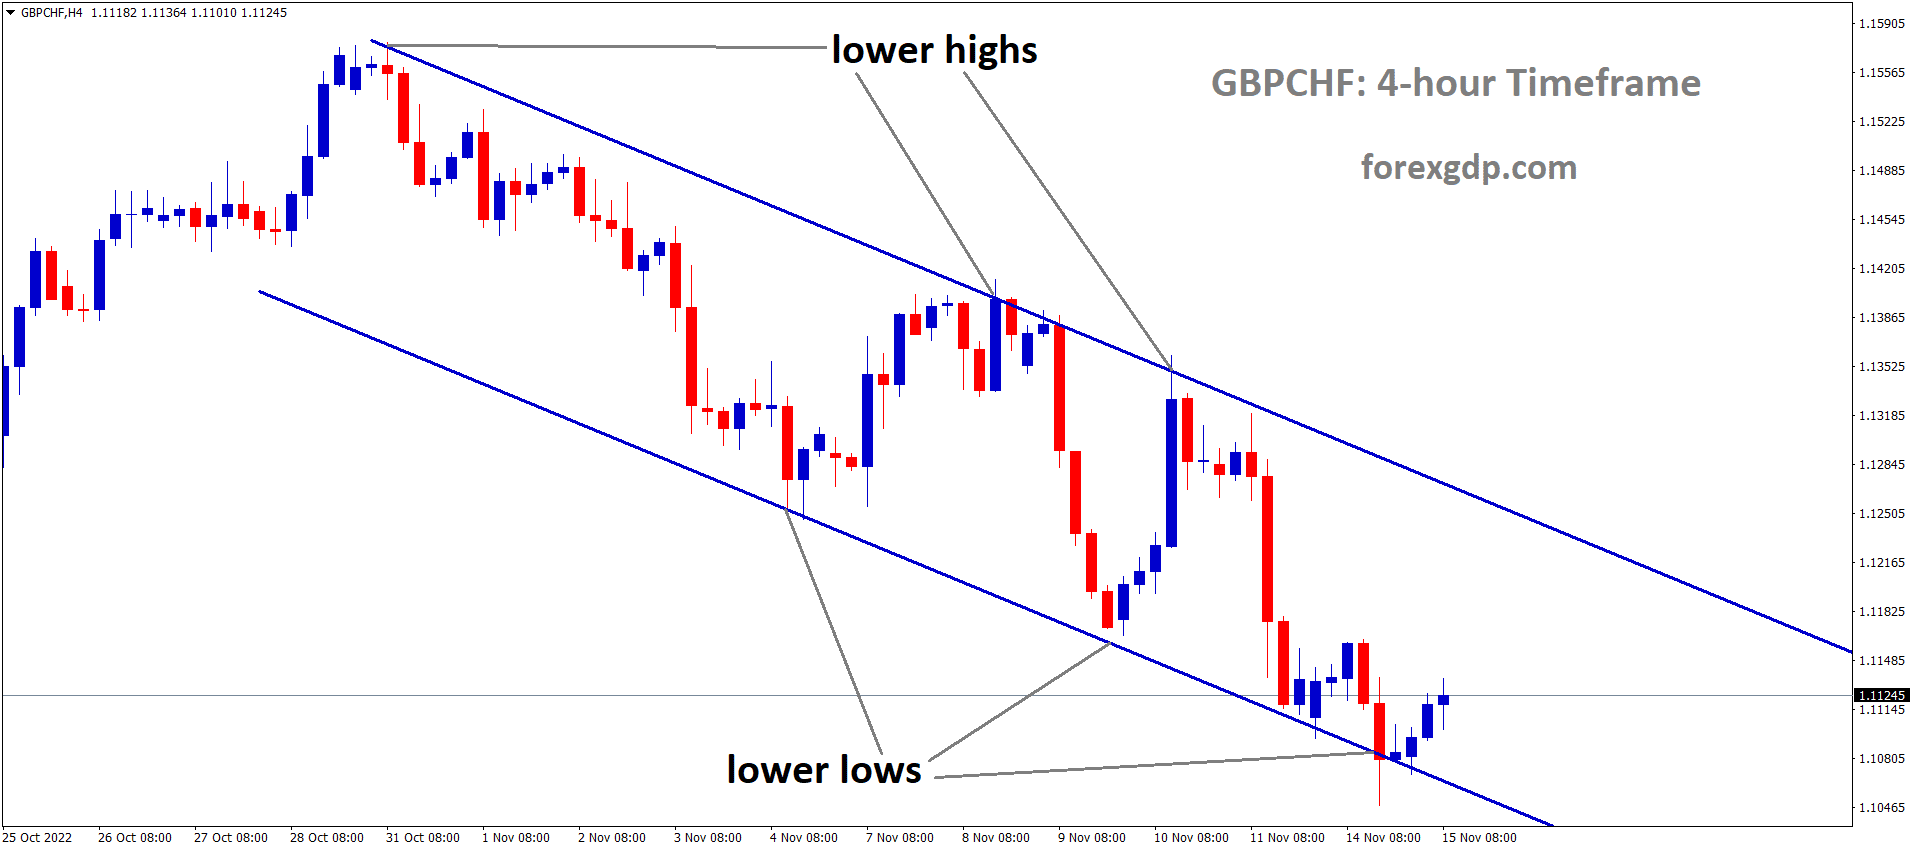 GBPCHF is moving in the Descending channel and the market has rebounded from the lower low area of the channel 2